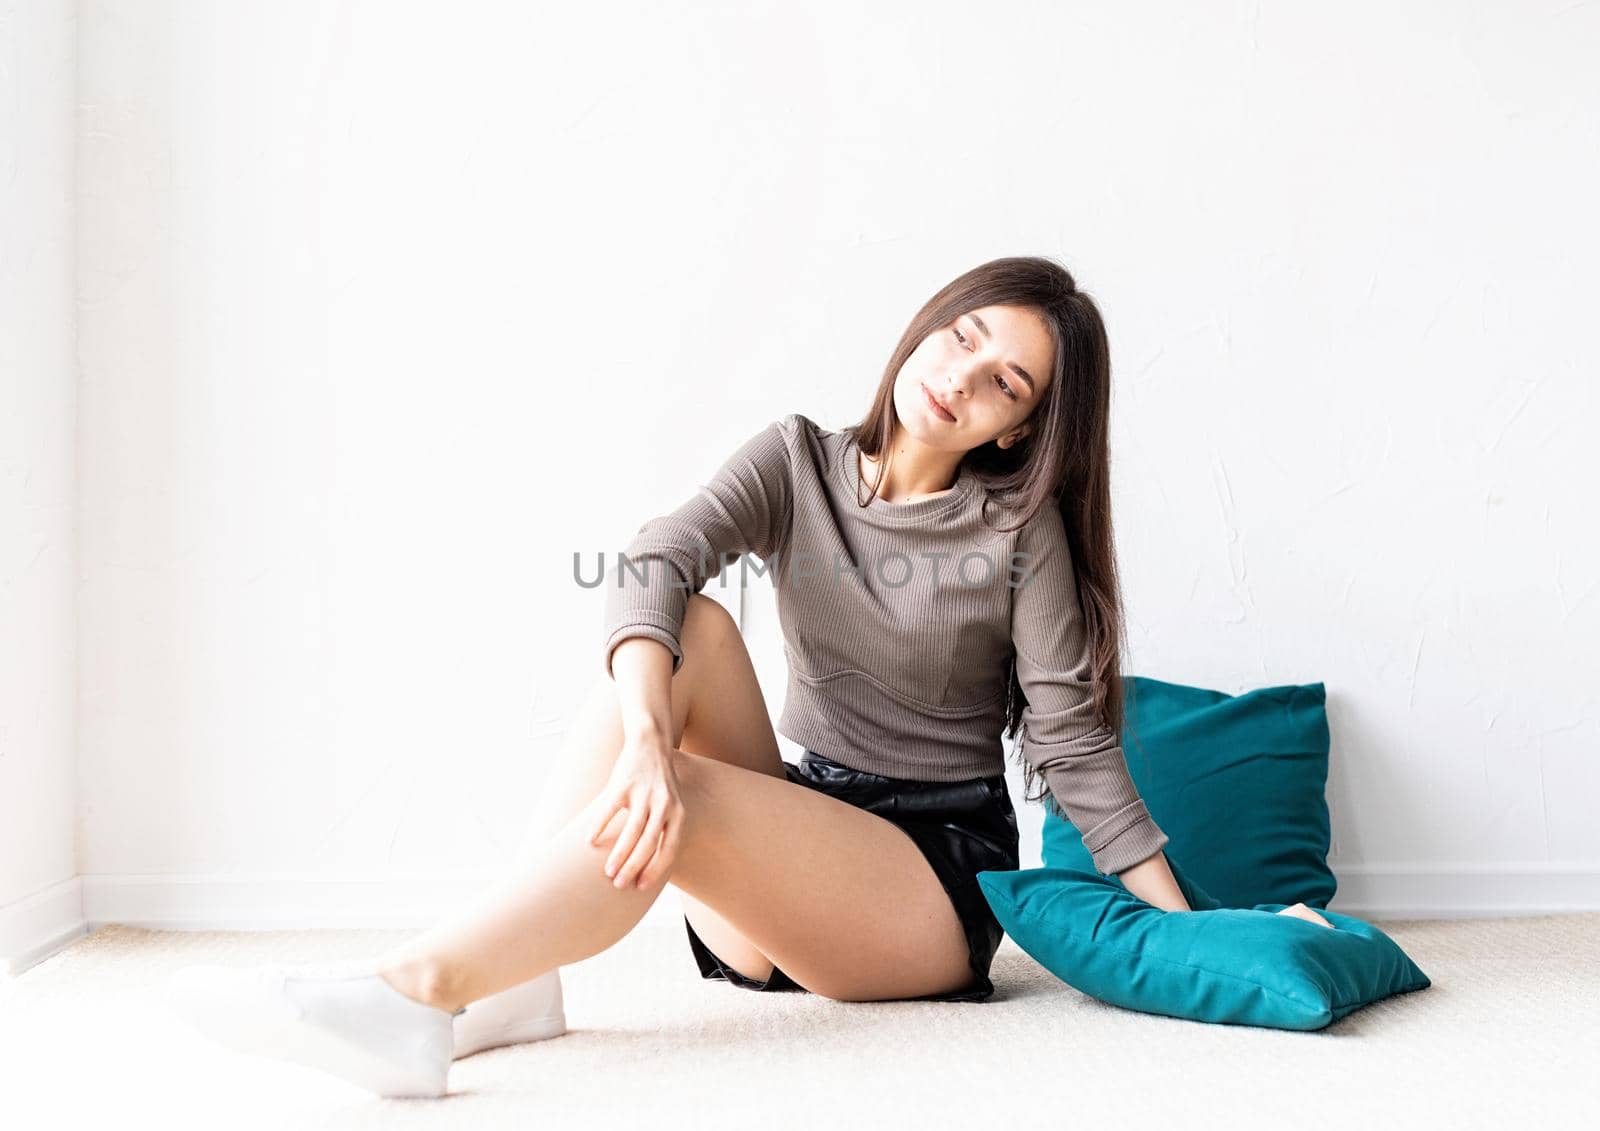 Beautiful young woman in casual clothes sitting on the floor with pillows smiling by Desperada